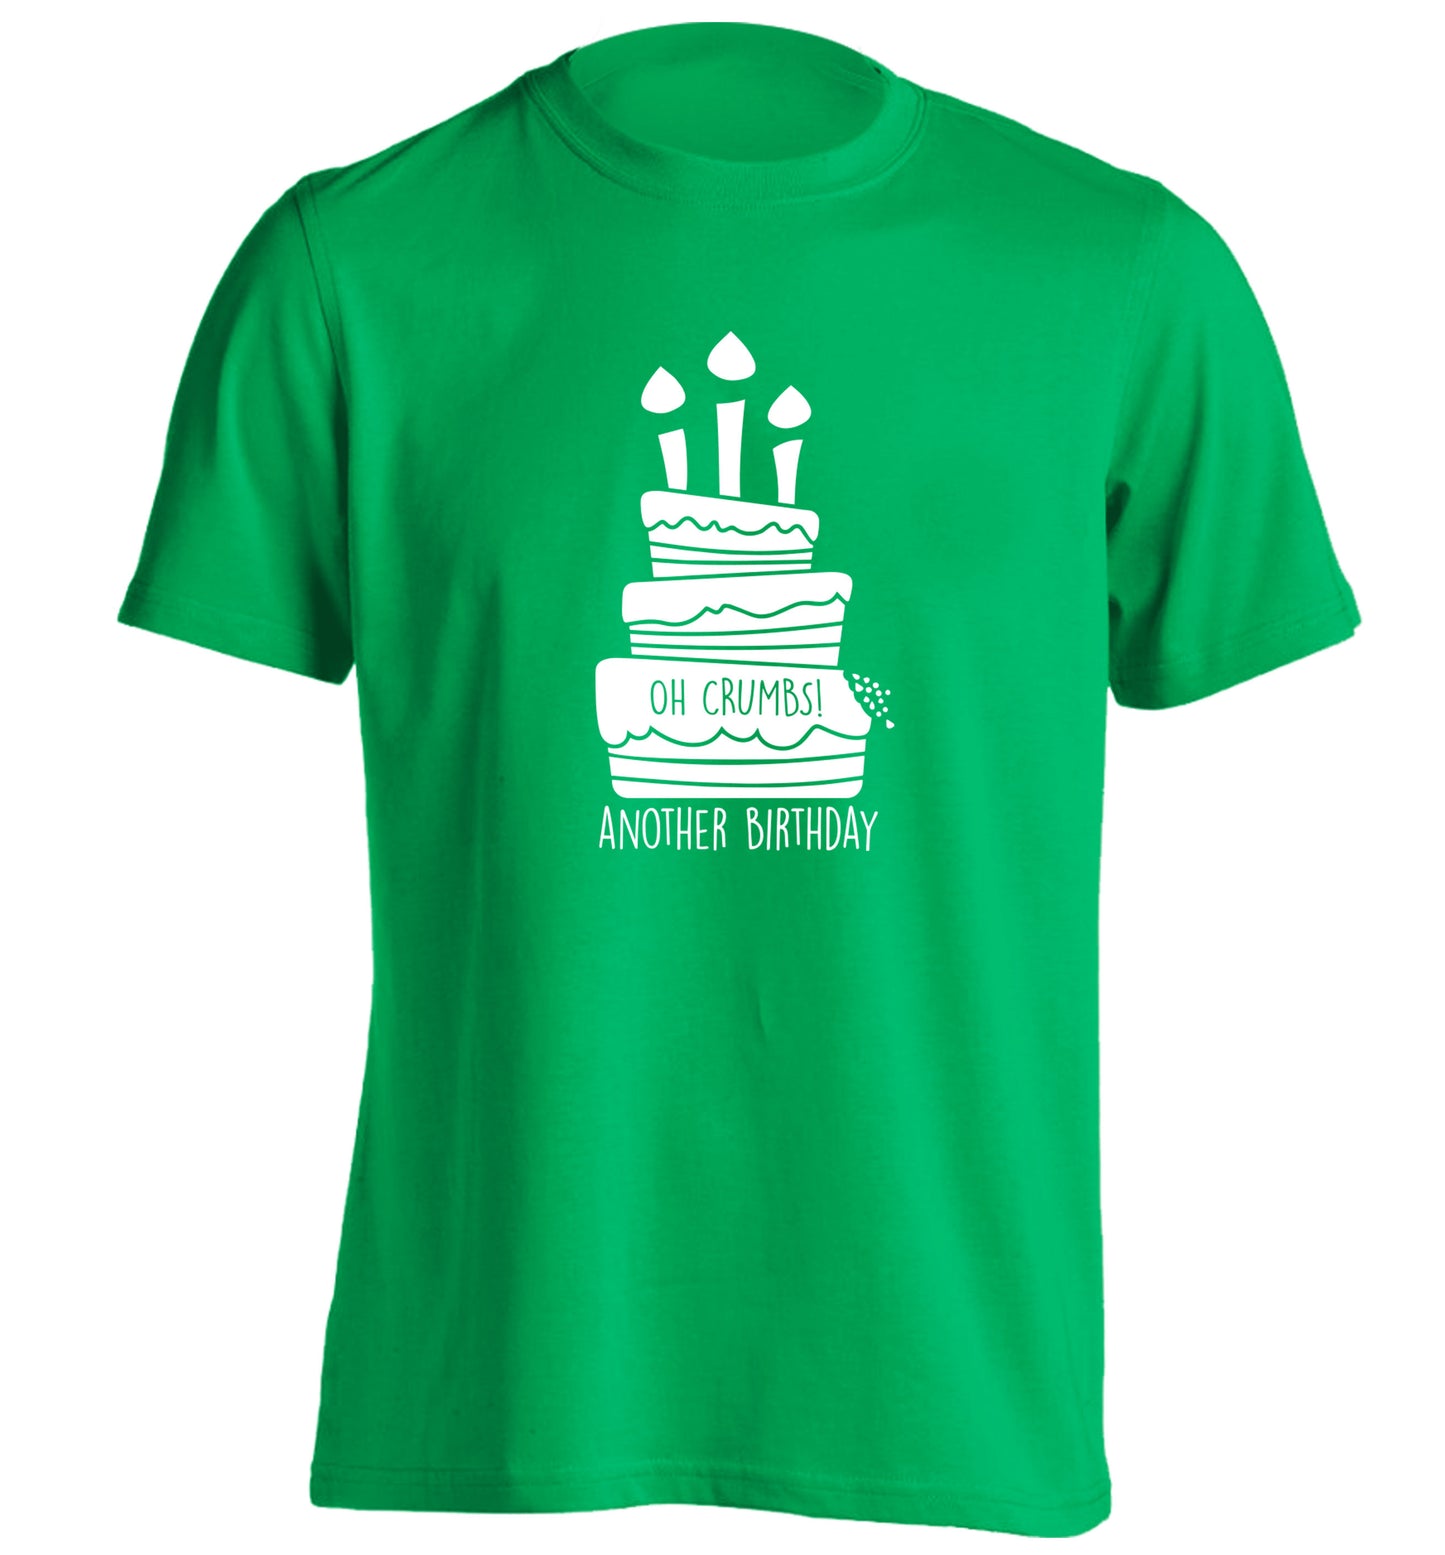 Oh crumbs another birthday! adults unisex green Tshirt 2XL